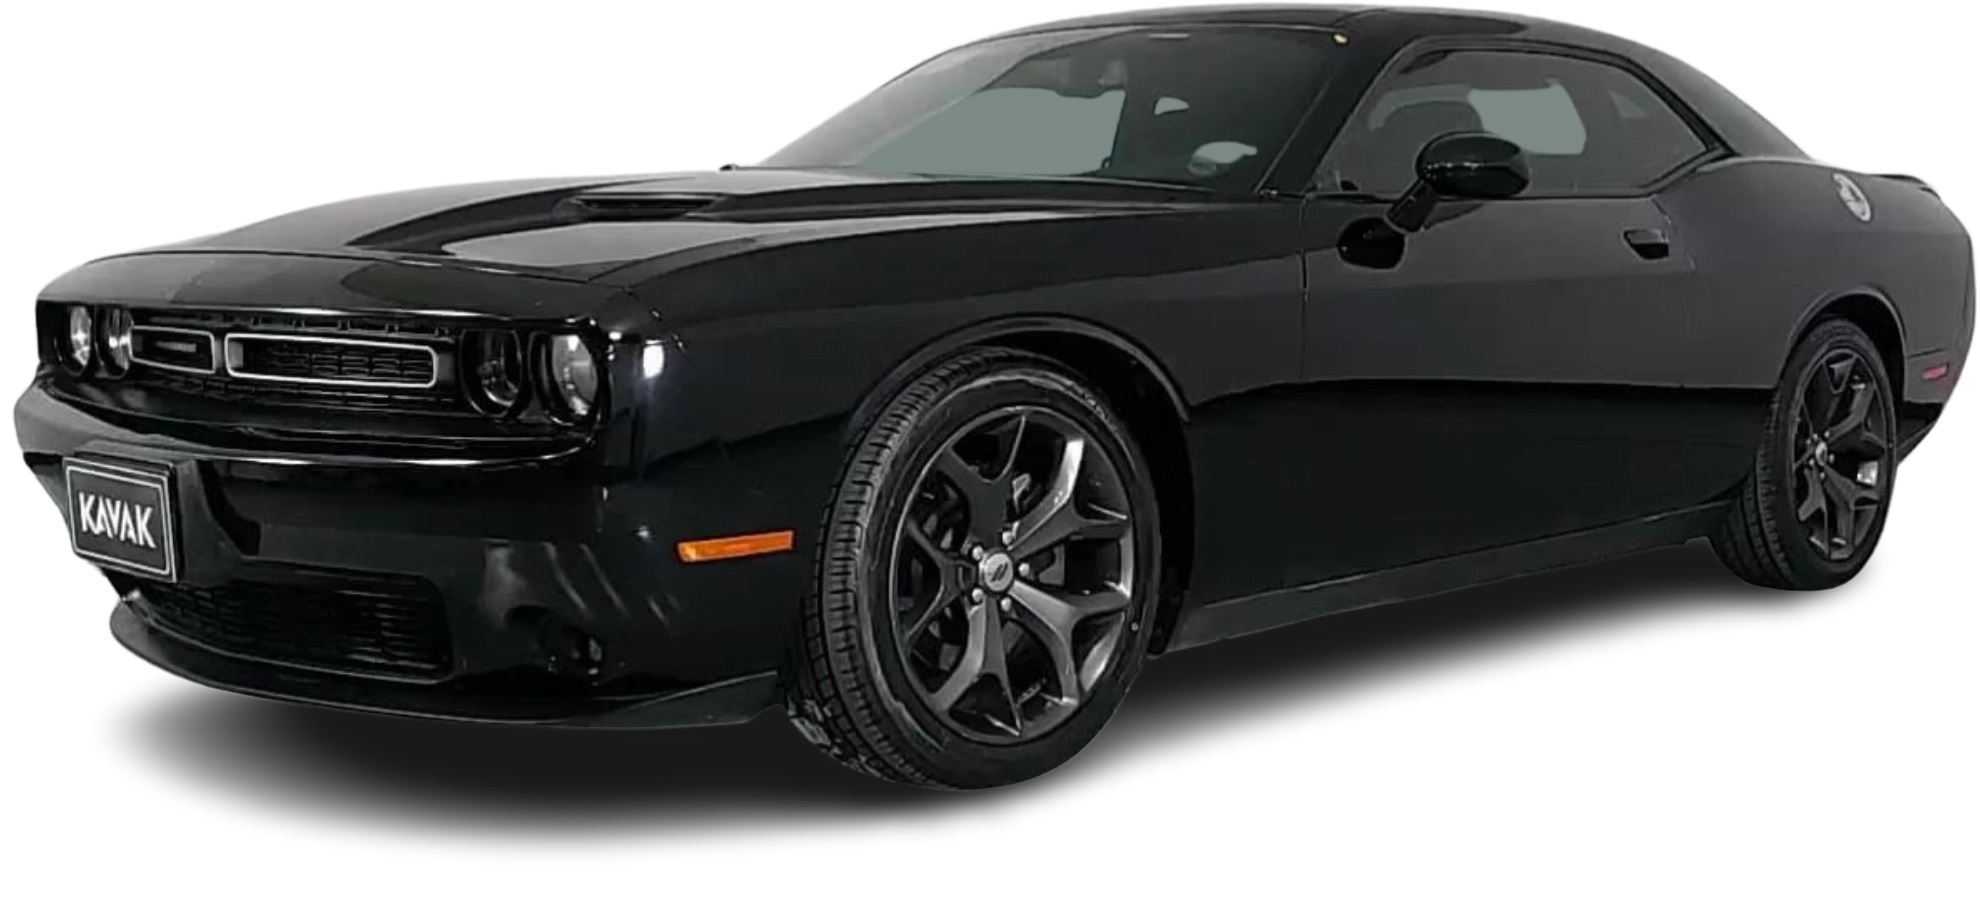 Dodge Challenger Coupe 2022 2021 2020 2019 2018 2017 2016 2015 2014 2013 2012 2011 2010